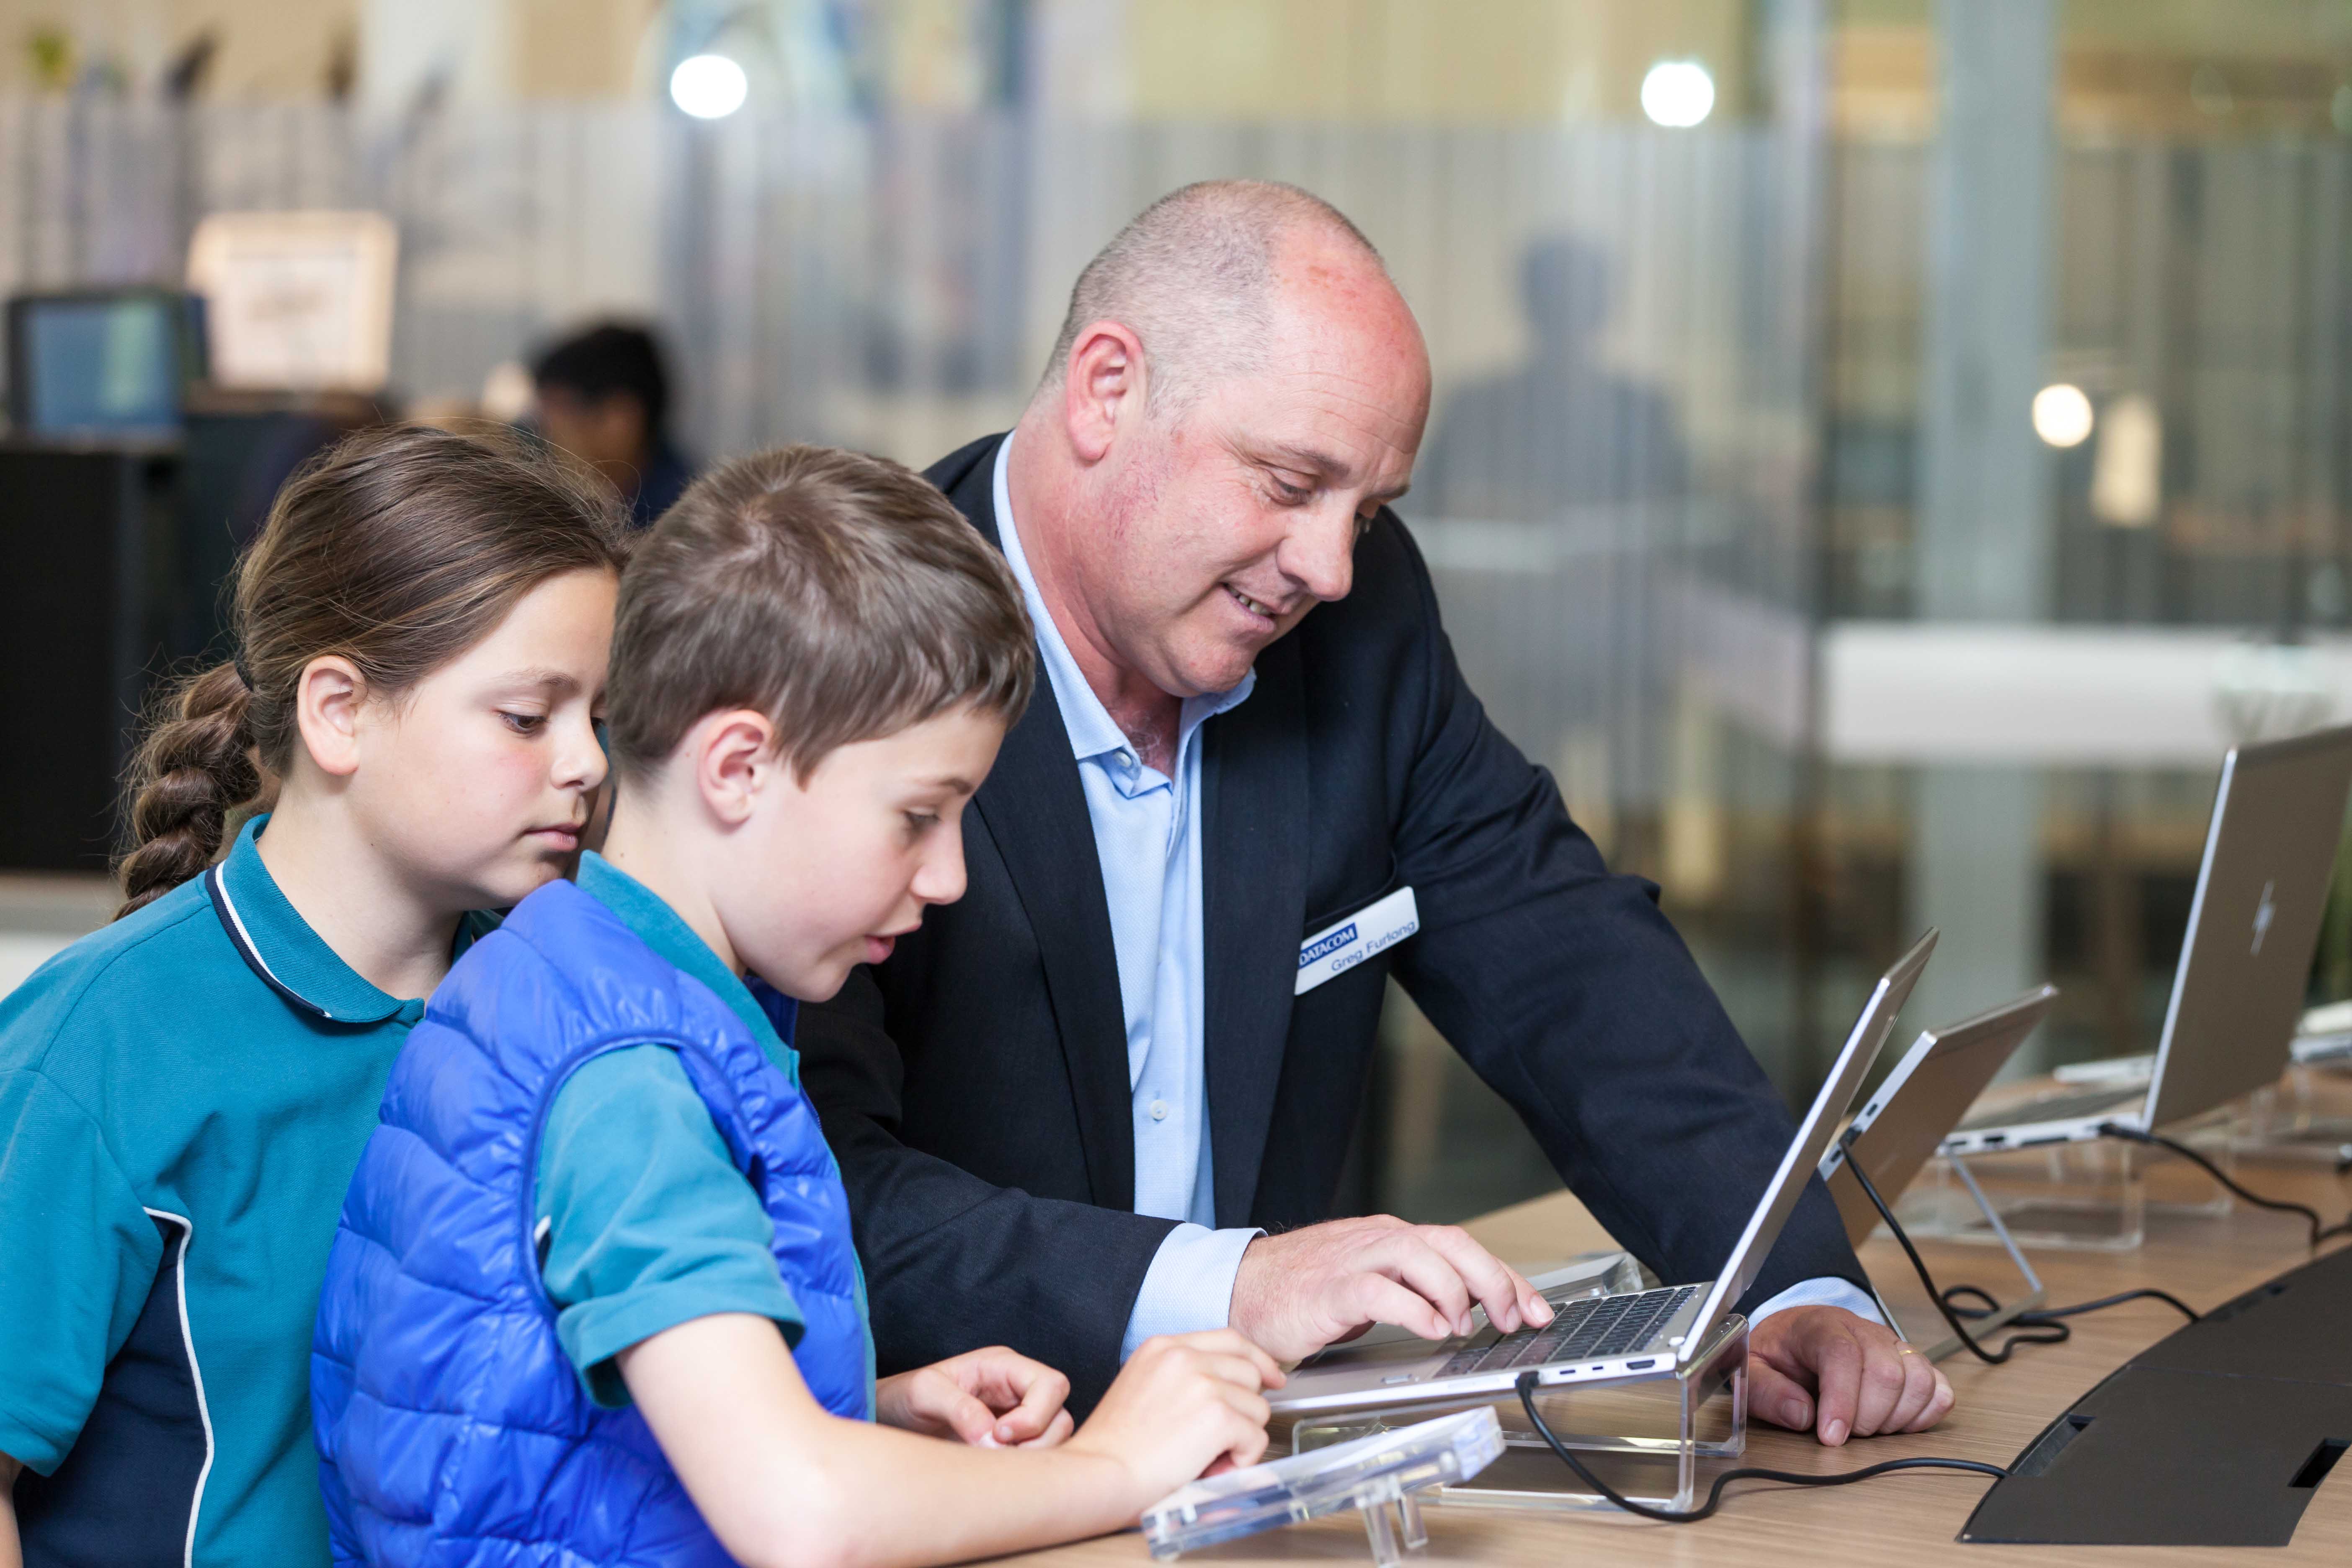 Adult man in a suit helping young students while using a laptop